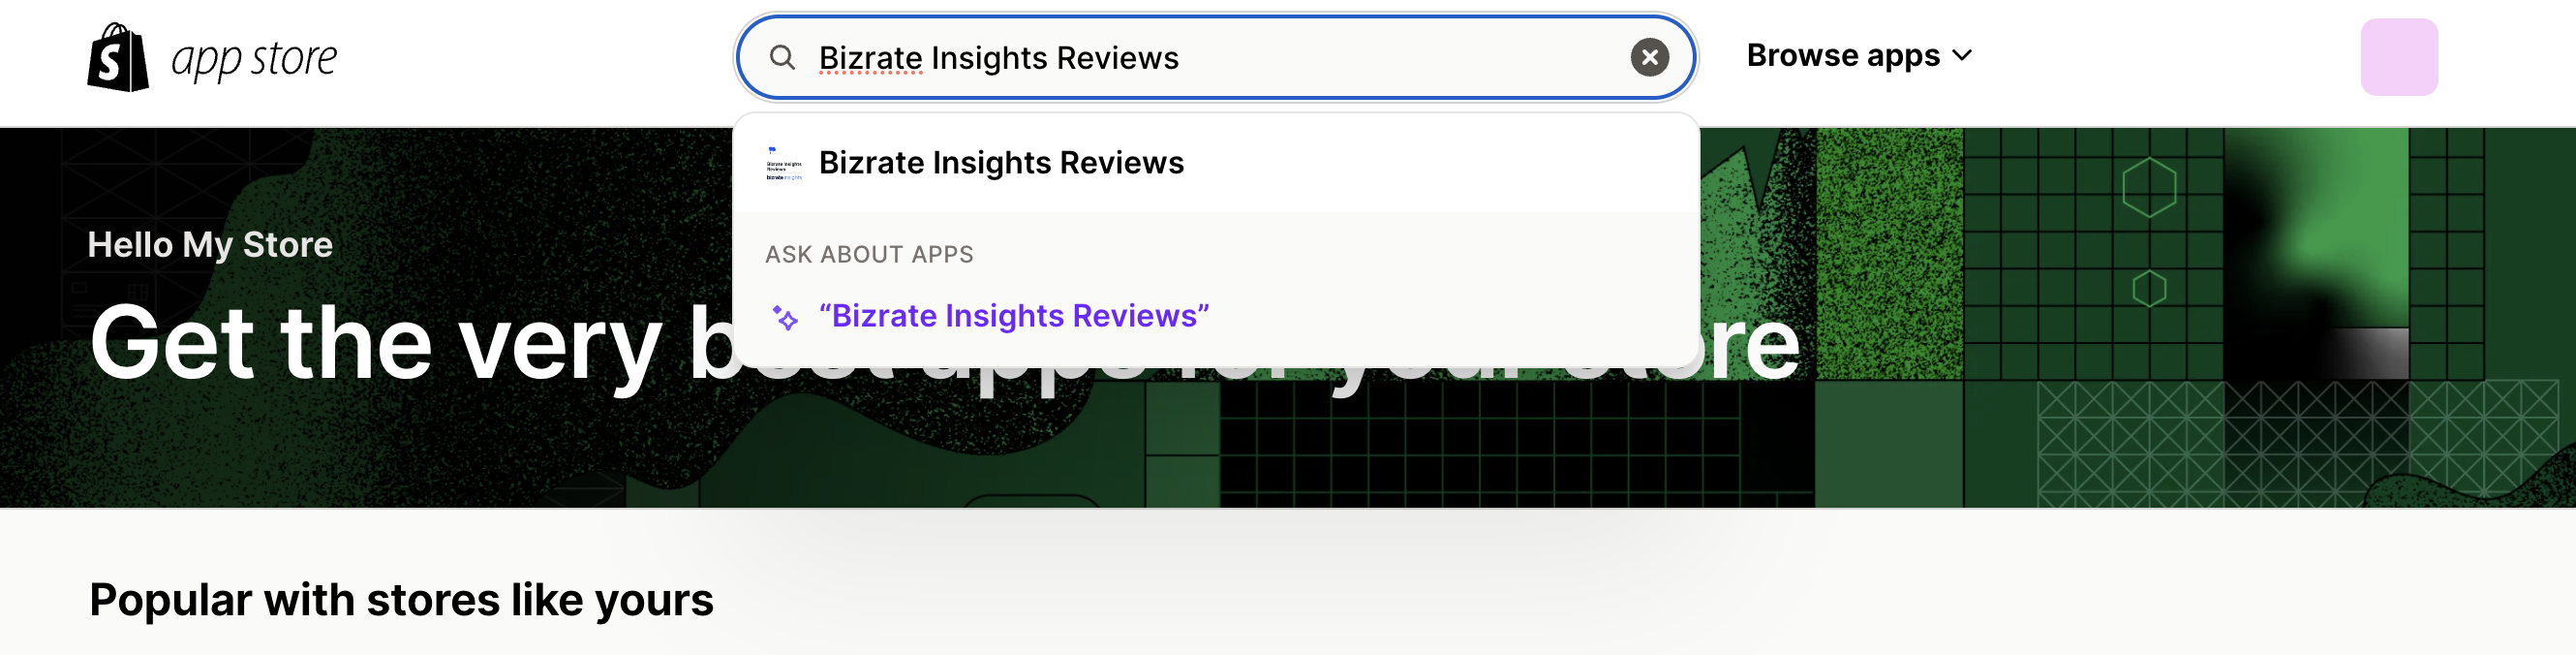 Image of search bar in Shopify app store searching for "Bizrate Insights Reviews"